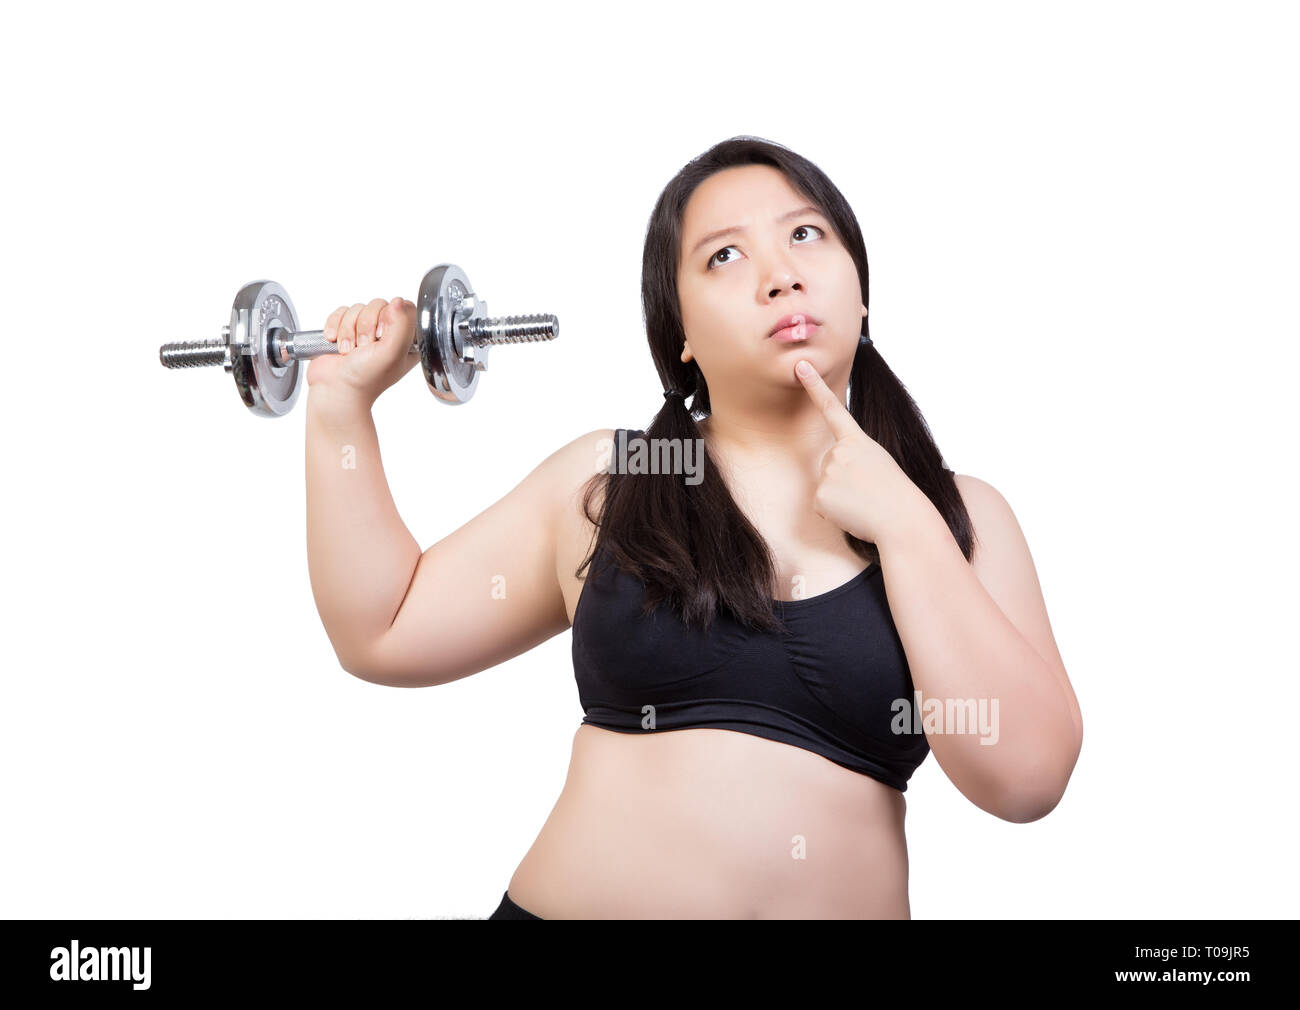 beautiful chubby fat woman lift dumbbell finger point to chin doubt about exercise weight training Stock Photo